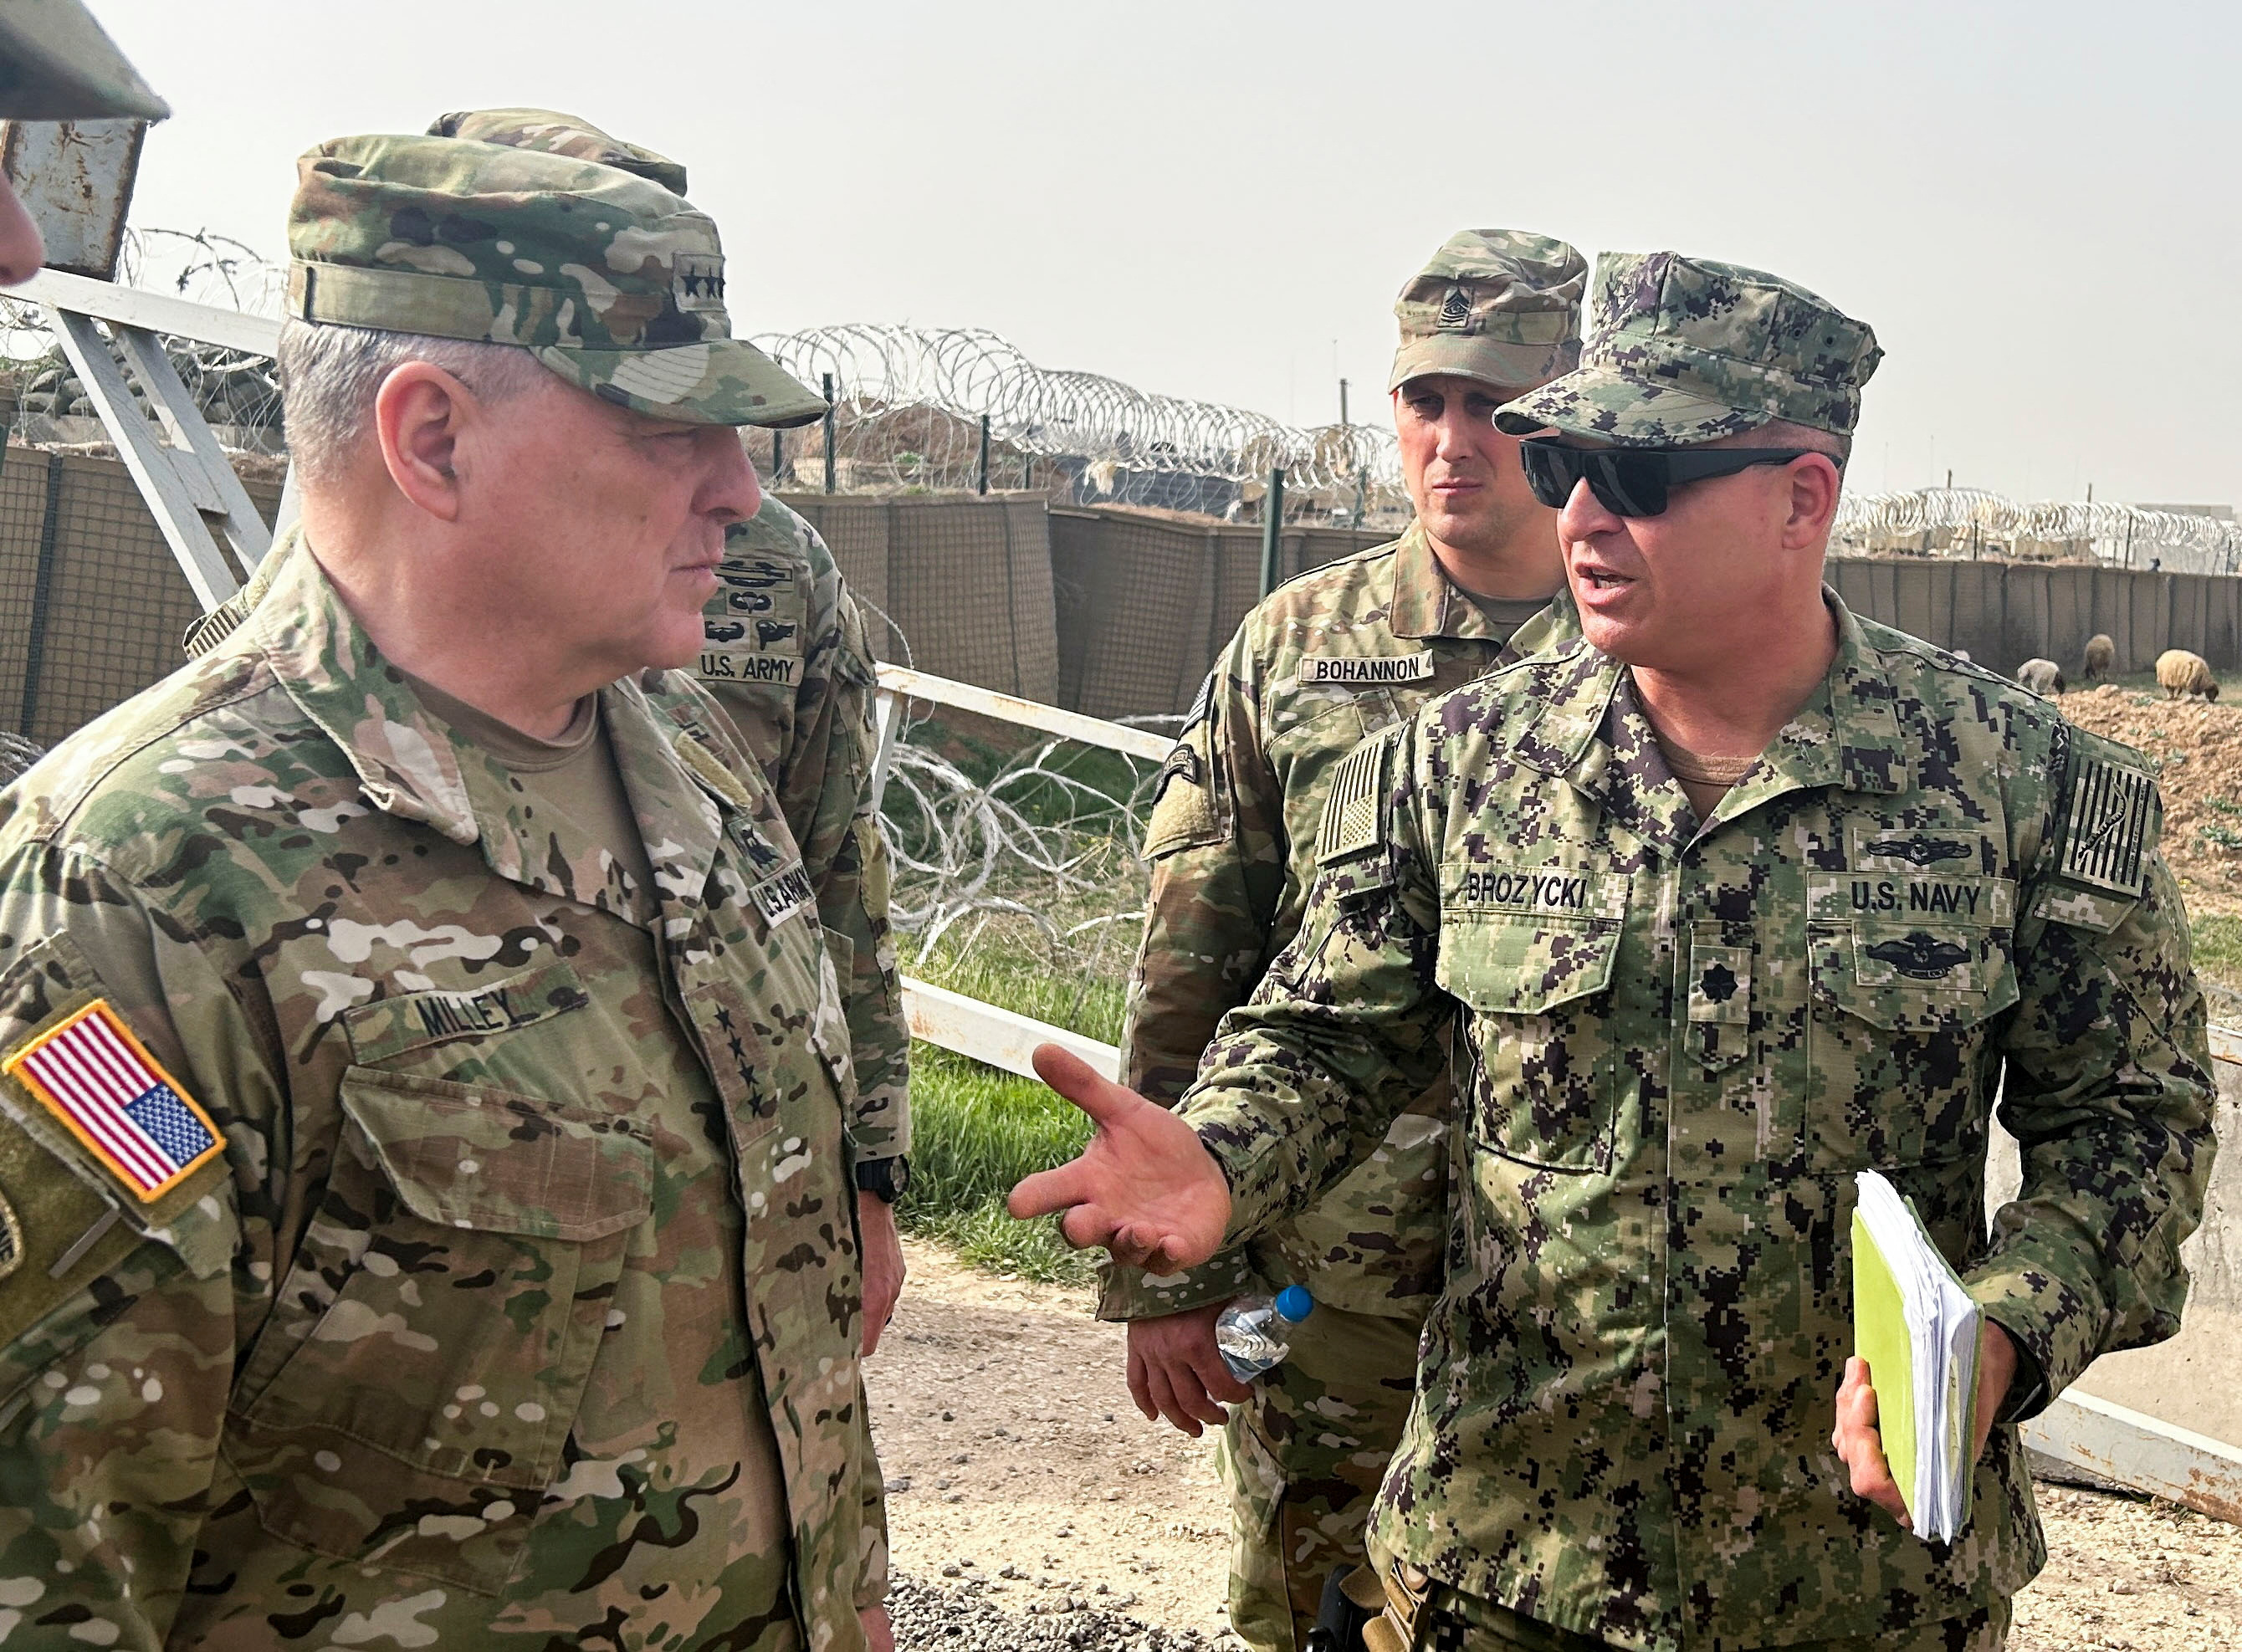 Syria mission worth the risk, top U.S. general says after rare